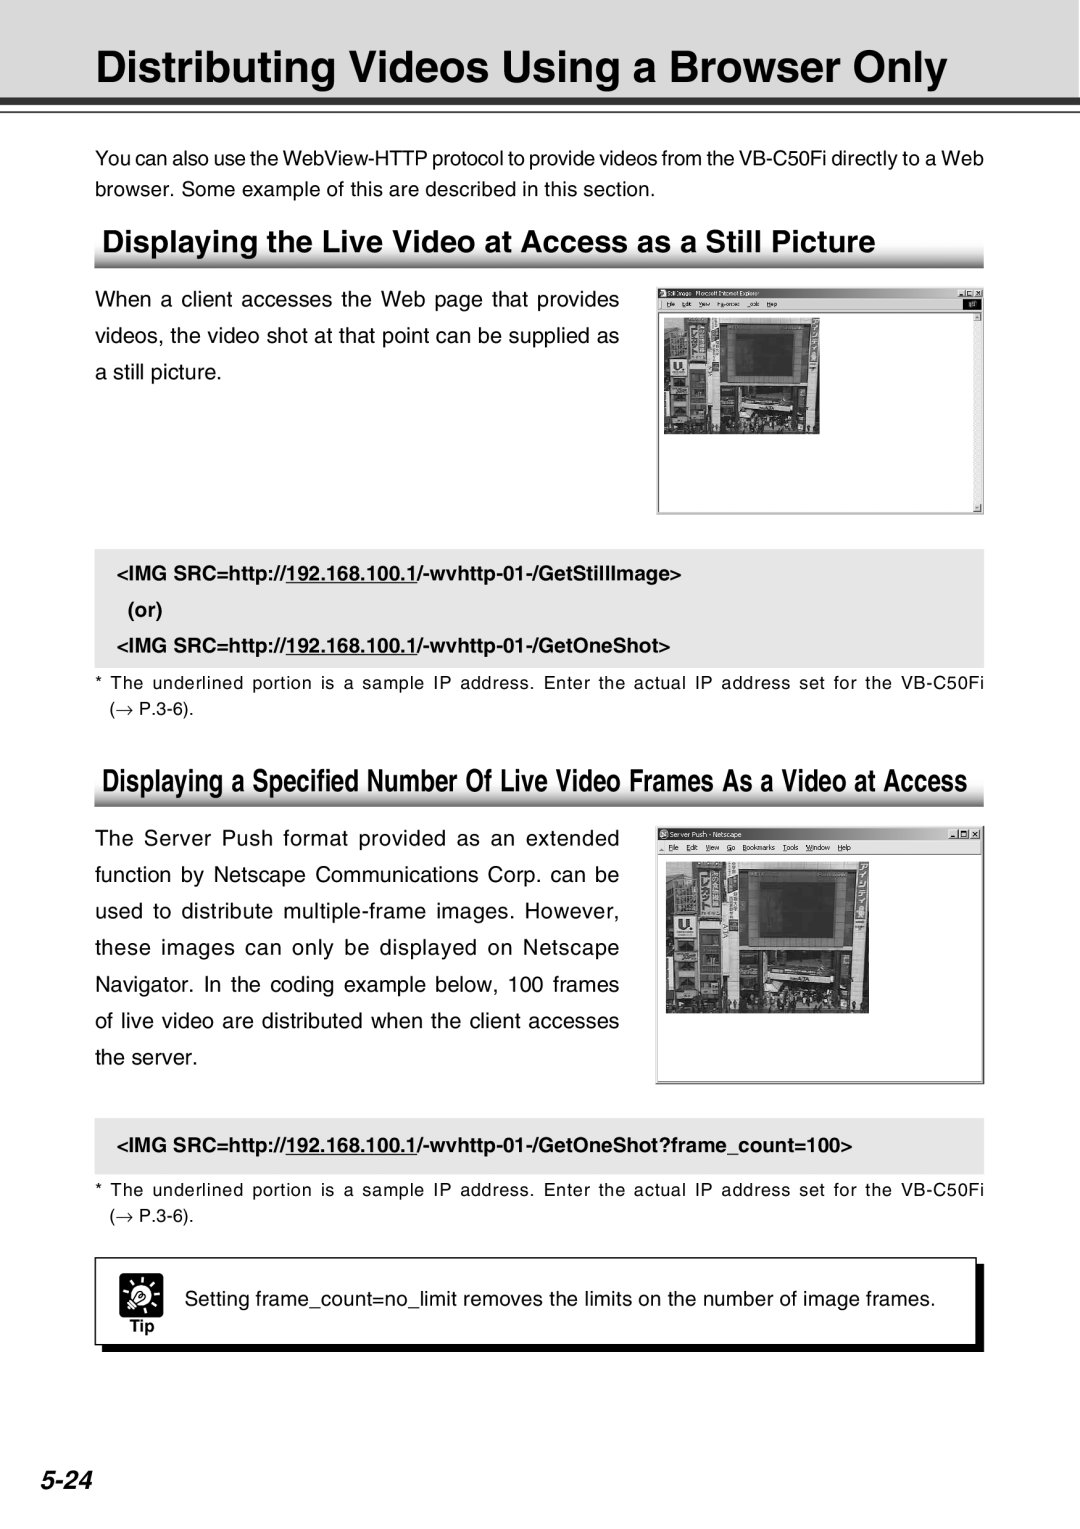 Canon Vb-C50fi user manual Distributing Videos Using a Browser Only, 5-24 